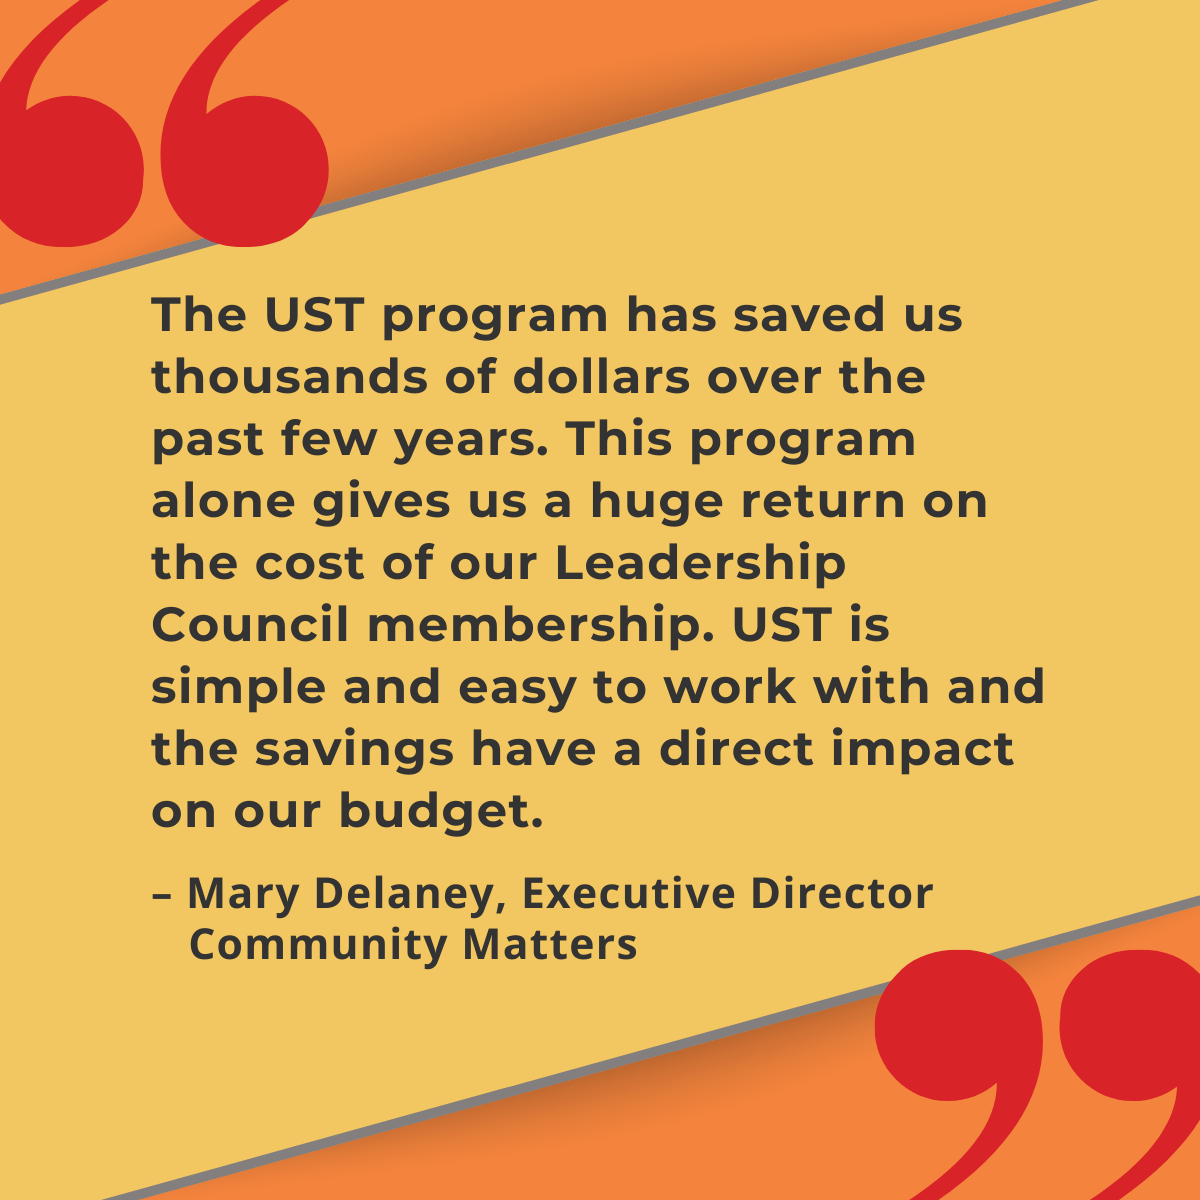 "The UST program has saved us thousands of dollars over the past few years. This program alone gives us a huge return on the cost of our Leadership Council membership. UST is simple and easy to work with and the savings have a direct impact on our budget." –Mary Delaney, Executive Director, Community Matters